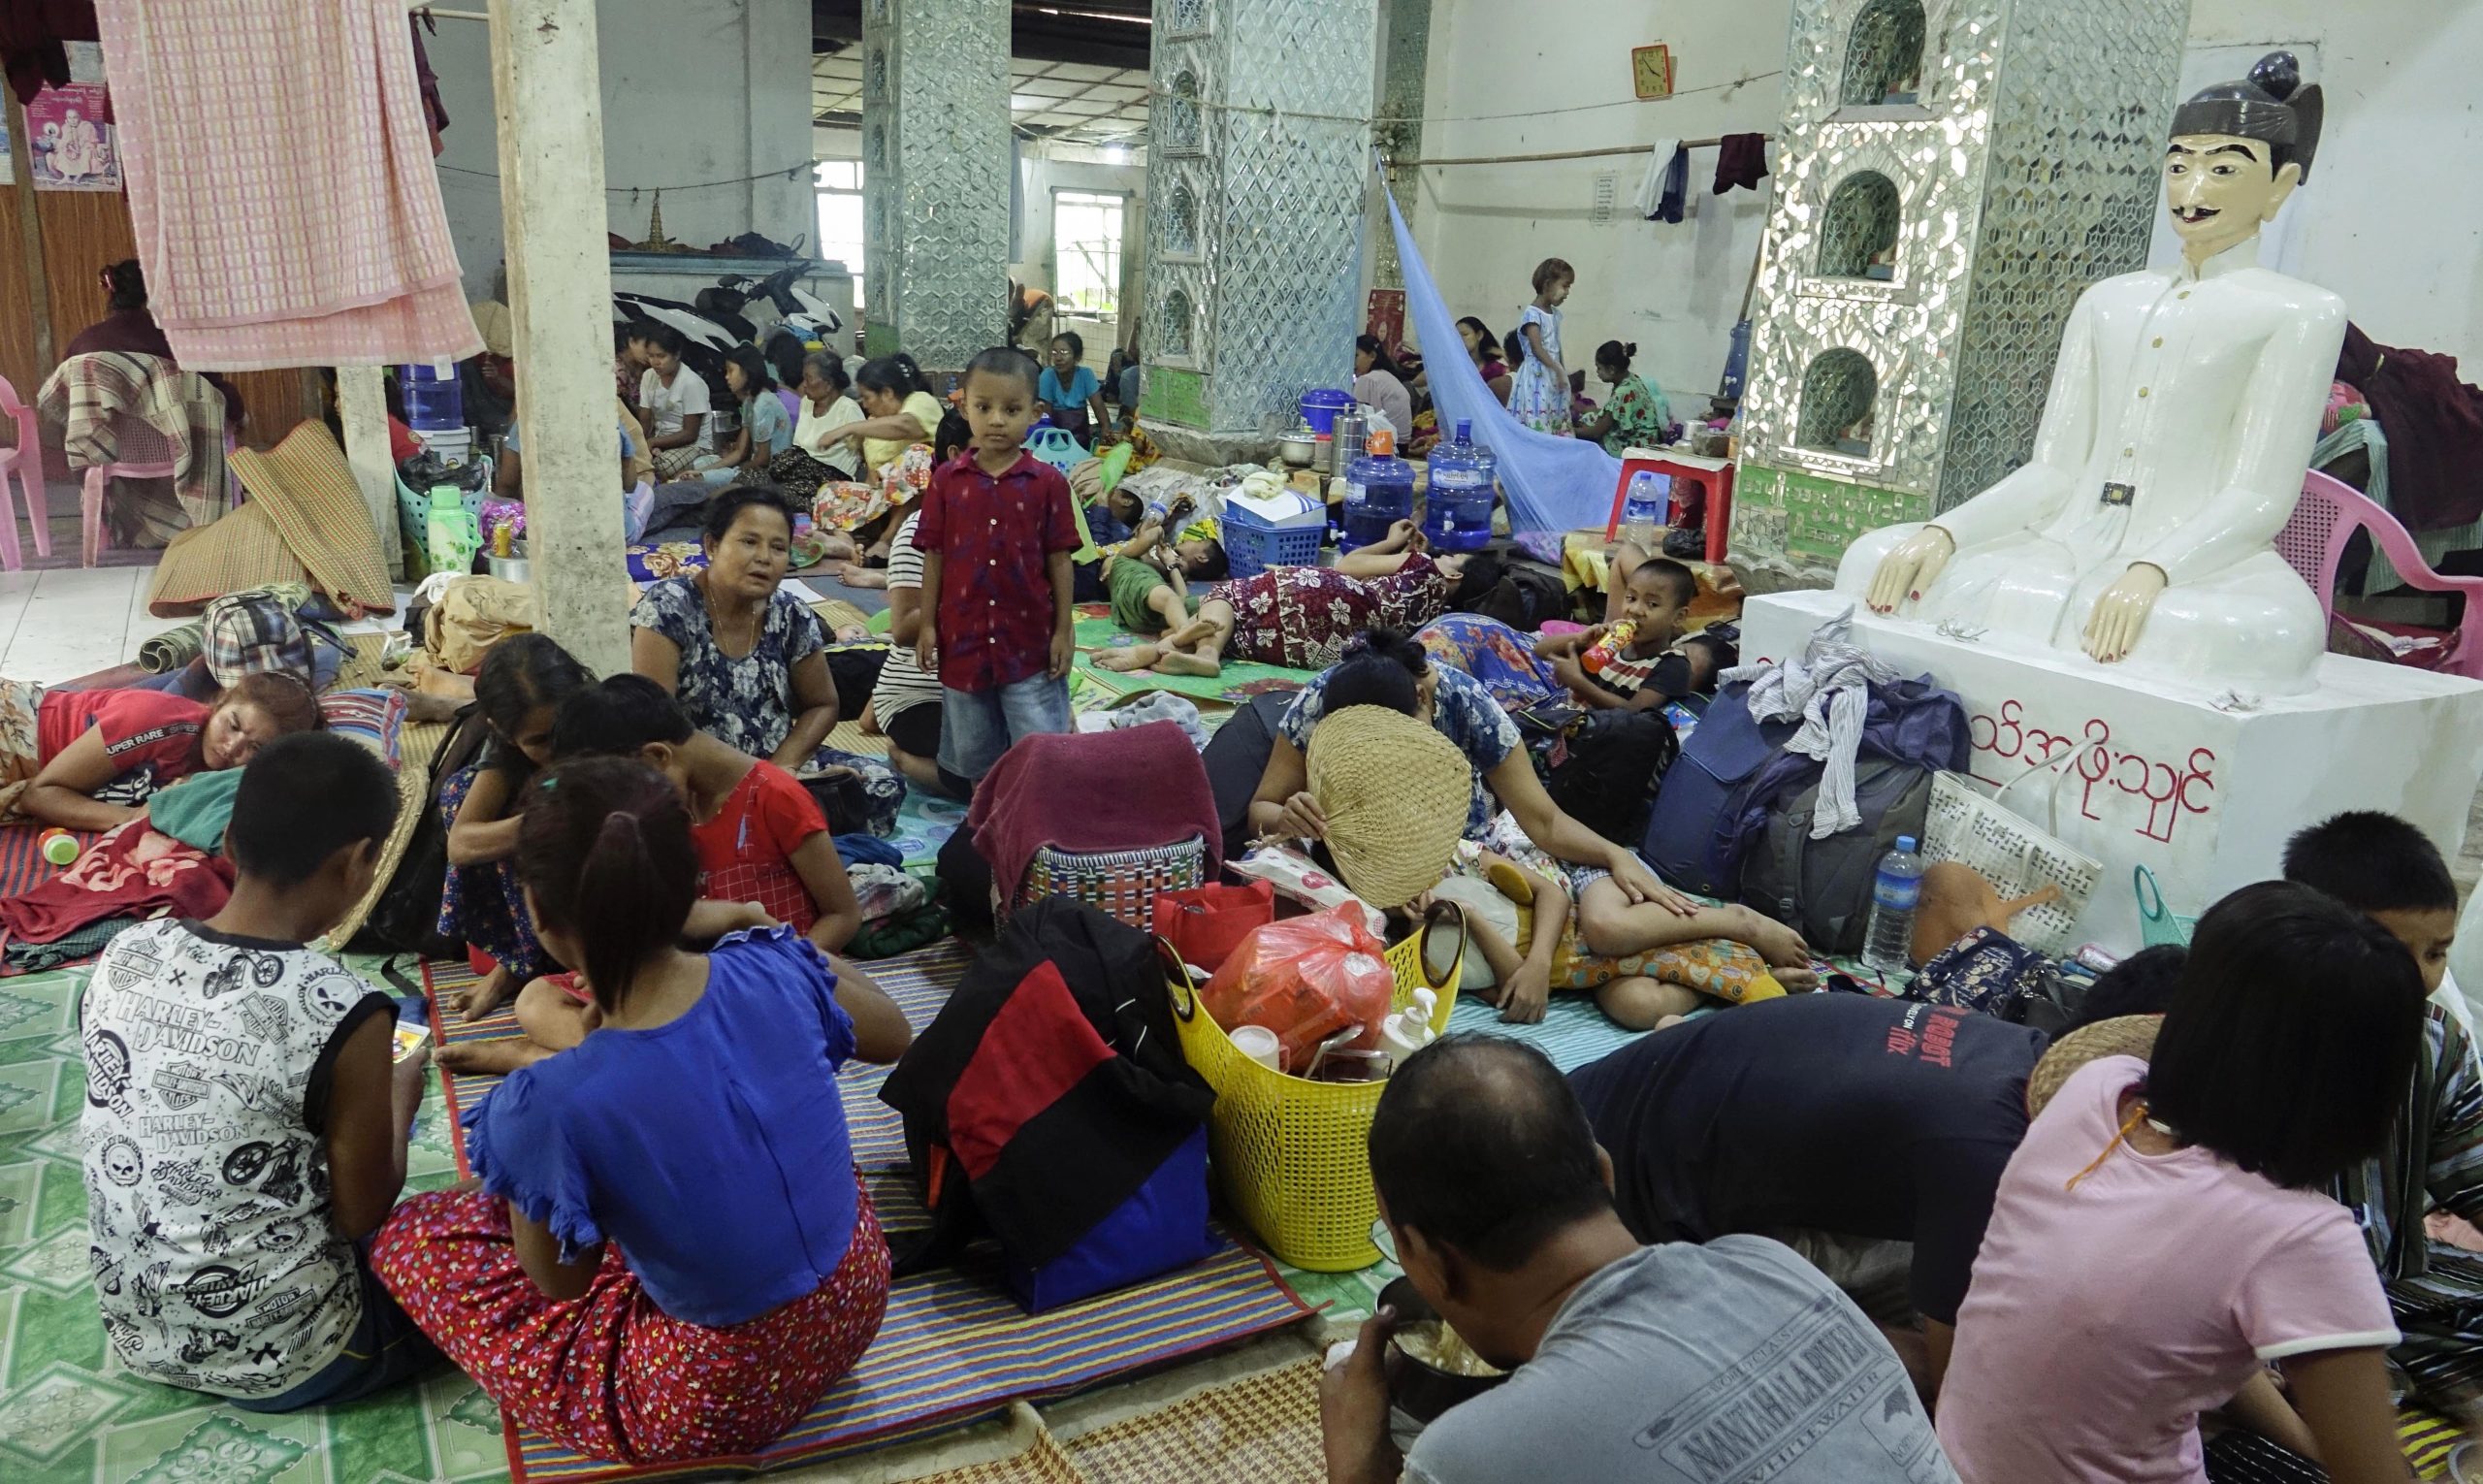 epa10624892 People gather at a monastery used as a temporary shelter in Sittwe, Rakhine State, Myanmar, 13 May 2023. A Very Severe Cyclonic Storm 'Mocha' formed at the Bay of Bengal and is expected to move towards Myanmar-Bangladesh border on 14 May, according to the Department of Meteorology and Hydrology in Myanmar.  EPA/NYUNT WIN